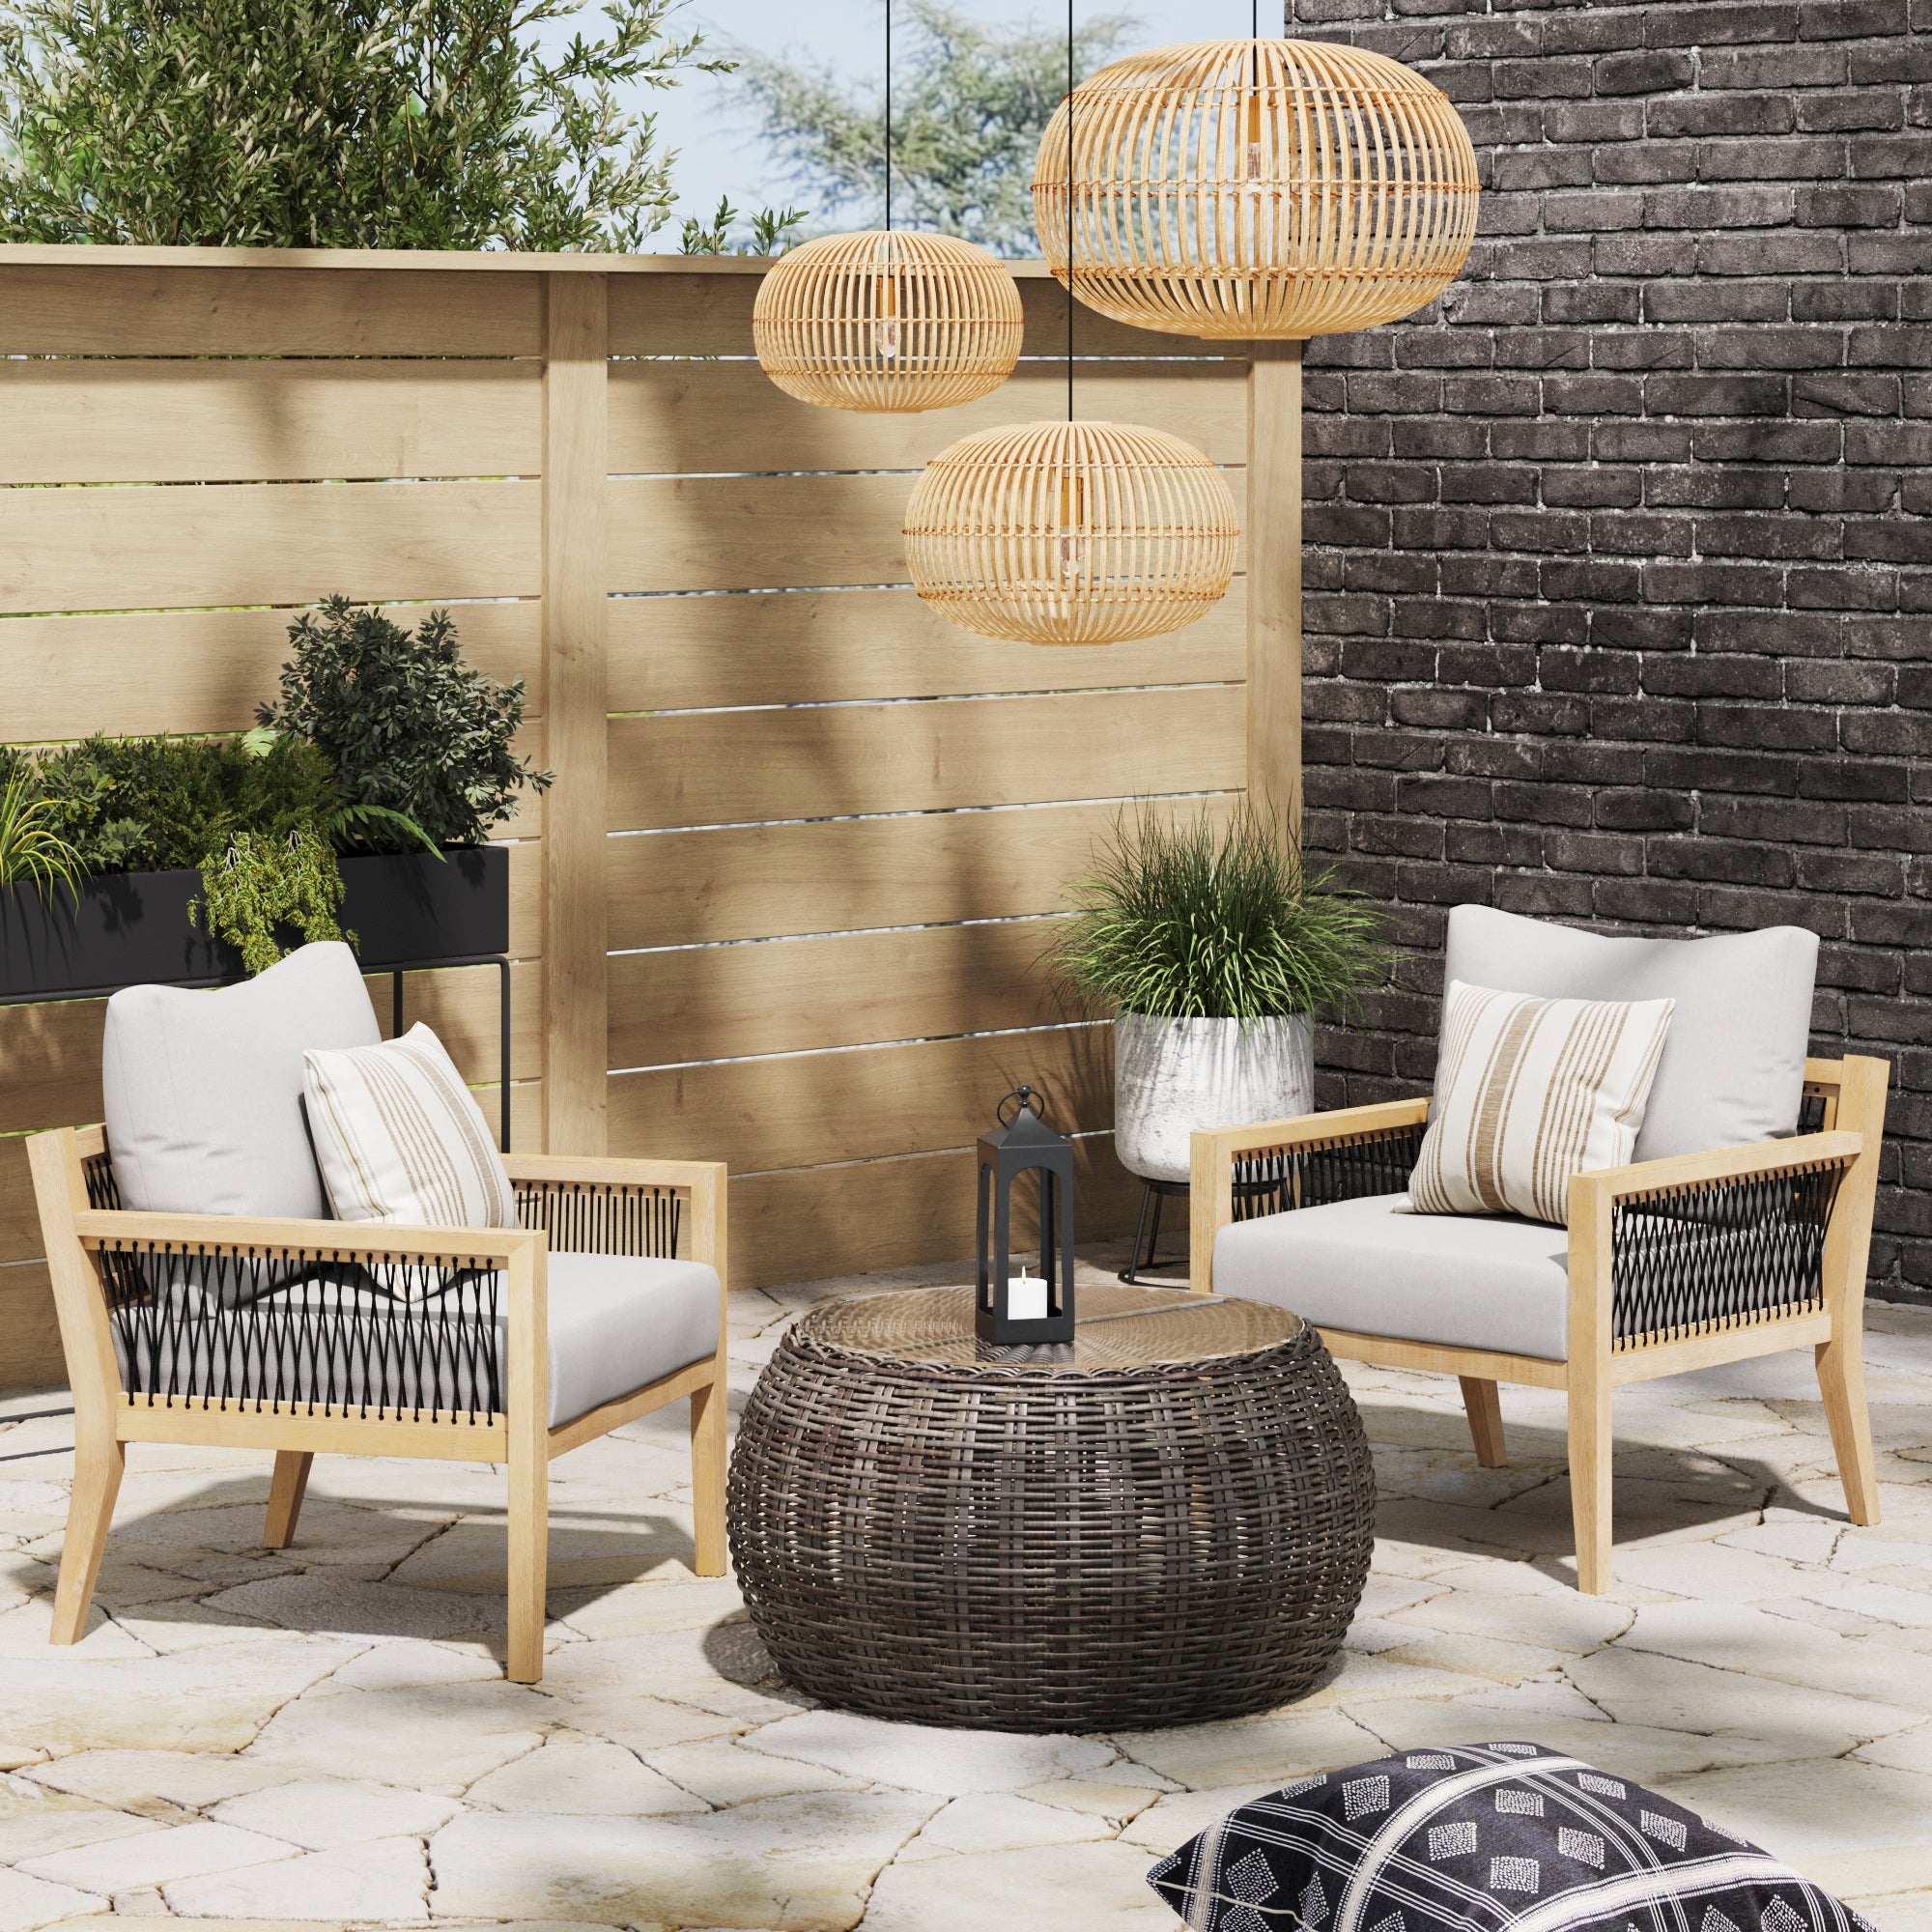 Set of 2 Outdoor Wood Cushioned Patio Chairs